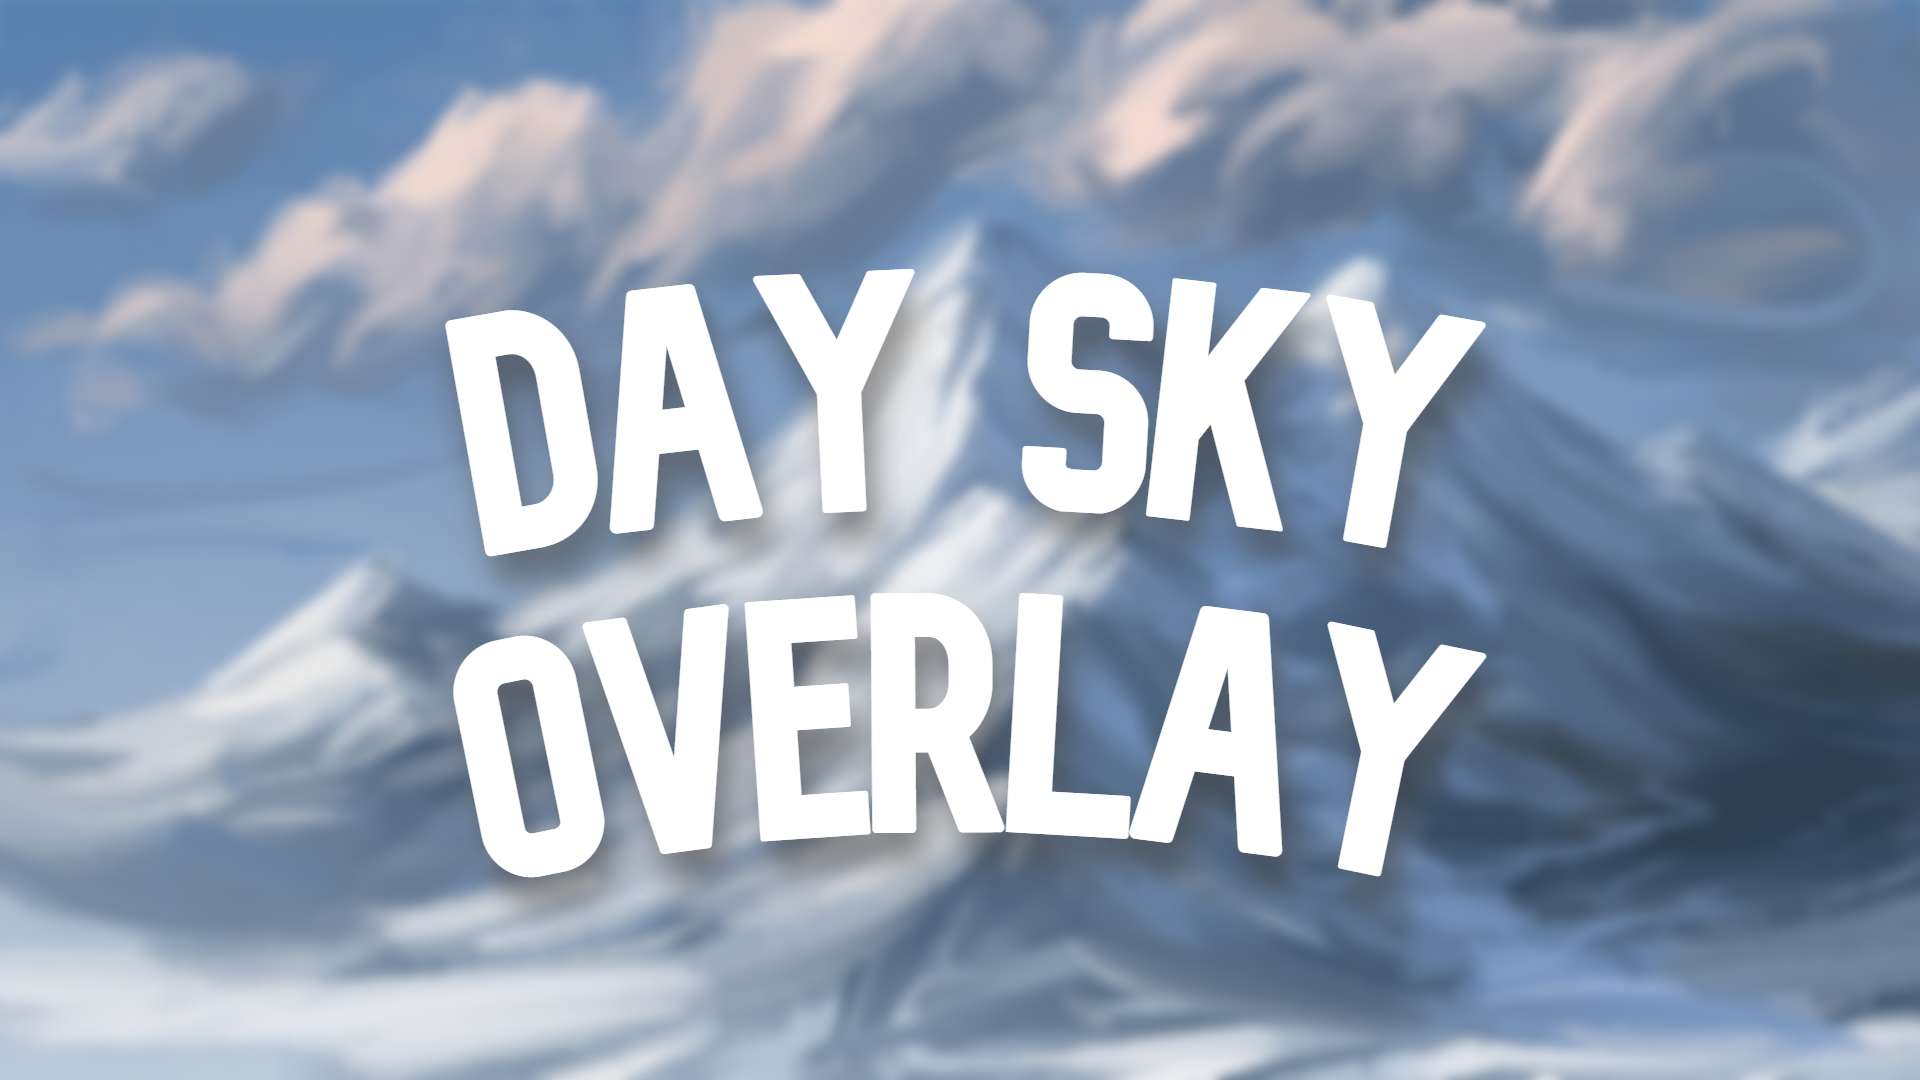 Day Sky Overlay #7 16 by Rh56 on PvPRP